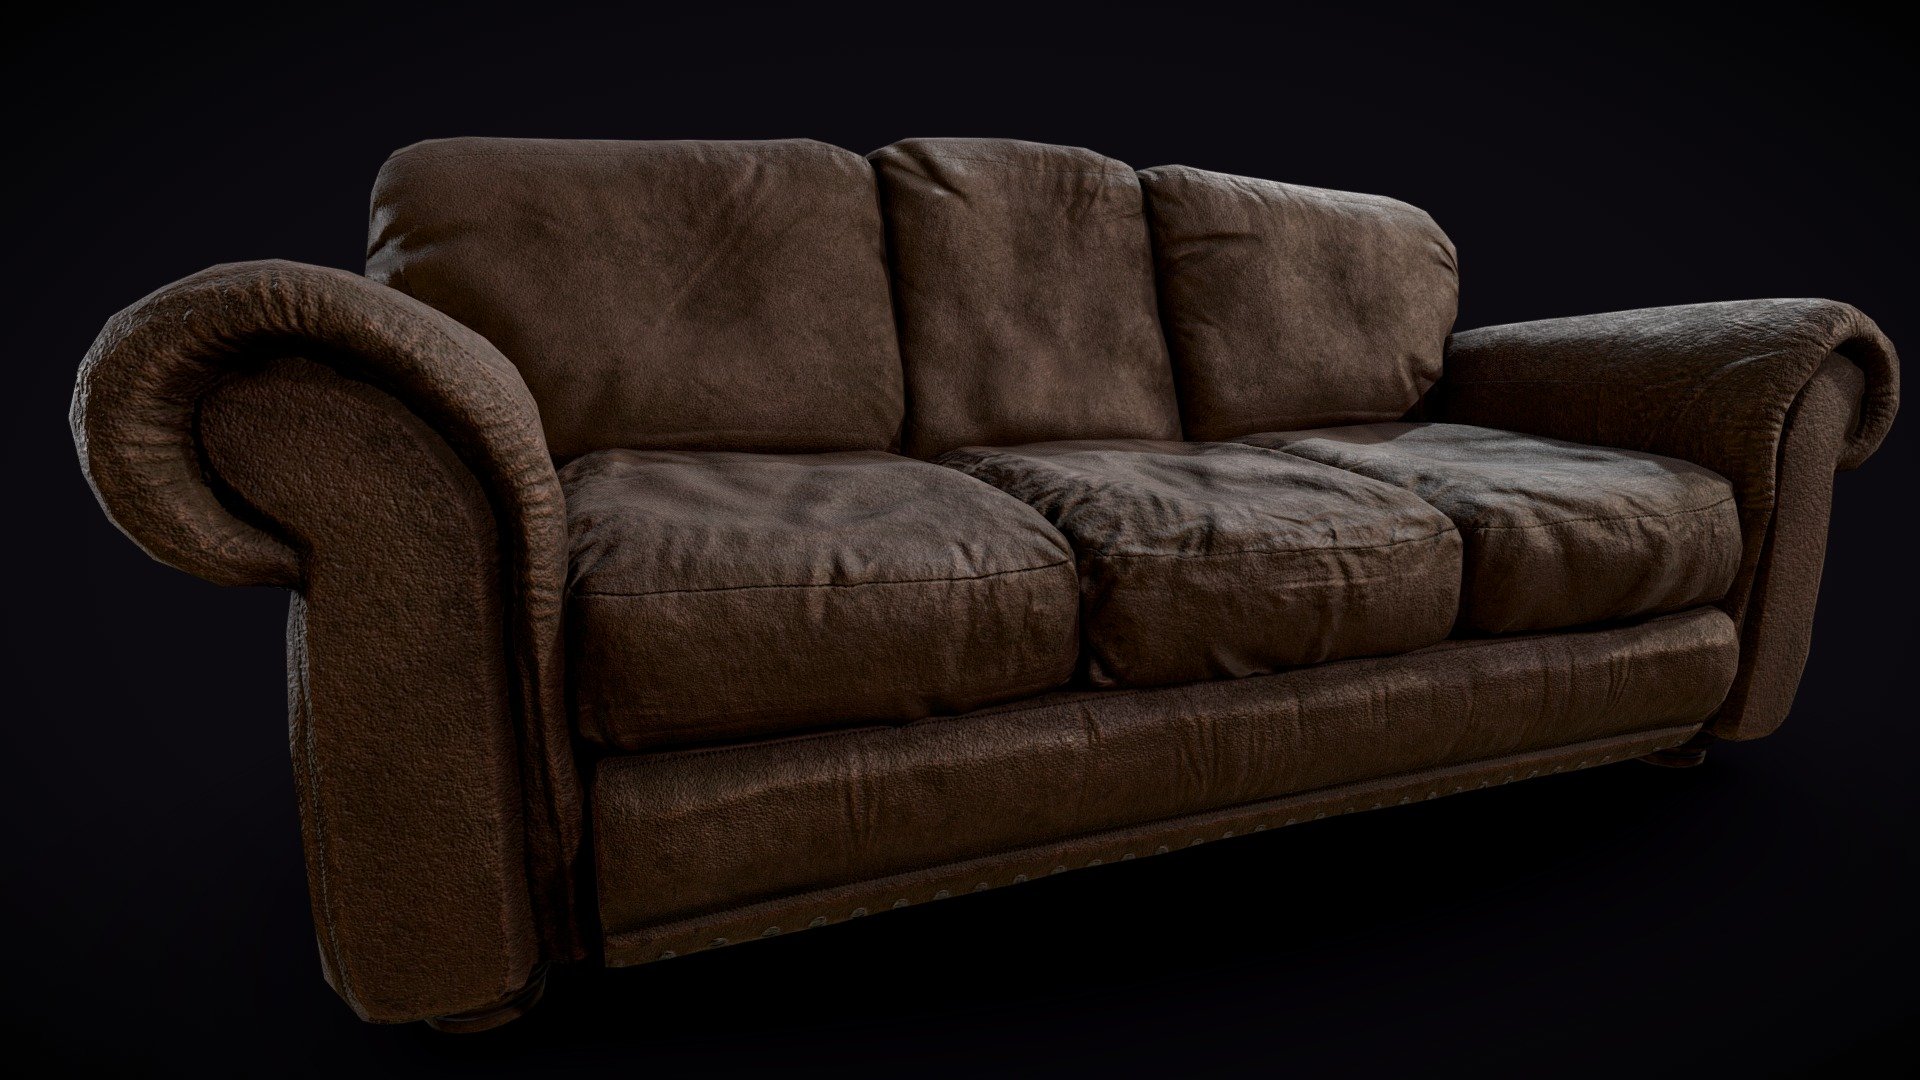 4K TEXTURES, PLEASE VIEW WITH HD TEXTURES (NOT SD) FOR FULL RES 
This Package is PBR Metallic Roughness specified.

IMPORTANT: IF YOU NEED OTHER TEXTURES, AFTER BUYING I CAN PROVIDE THE FOLLOWING (CAN'T UPLOAD BECAUSE OF SKETCHFAB'S LIMIT OF 1GB): *ARNOLD 5 (AI STANDARD), CORONA, MESH MAPS, PBR SPECULAR GLOSS, UNITY 5 (STANDARD SPECULAR) &amp; VRAY.  IF YOU NEED A TEXTURE ATLAS FOR UNITY SO THIS CAN BE USED WITH ONE MATERIAL, IT CAN BE DONE, IF YOU NEED 2K TEXTURES, IT CAN ALSO BE DONE.*

The sofa without Bottom Wooden Supports equals a total of 6002 Vertices, 11972 tri's, 5986 faces, 11972 edges.

The sofa with Bottom Wooden Supports equals a total of 7130 Vertices, 14212 tri's, 7186 faces, 14292 edges.

If imported into maya (OBJ), separate the mesh to get the different components to assign each component it's corresponding textures).

Feel free to modify (edges can be deleted without affecting uv's in maya for example), or re texture. Re-sale or giveaway of this model is prohibited 3d model